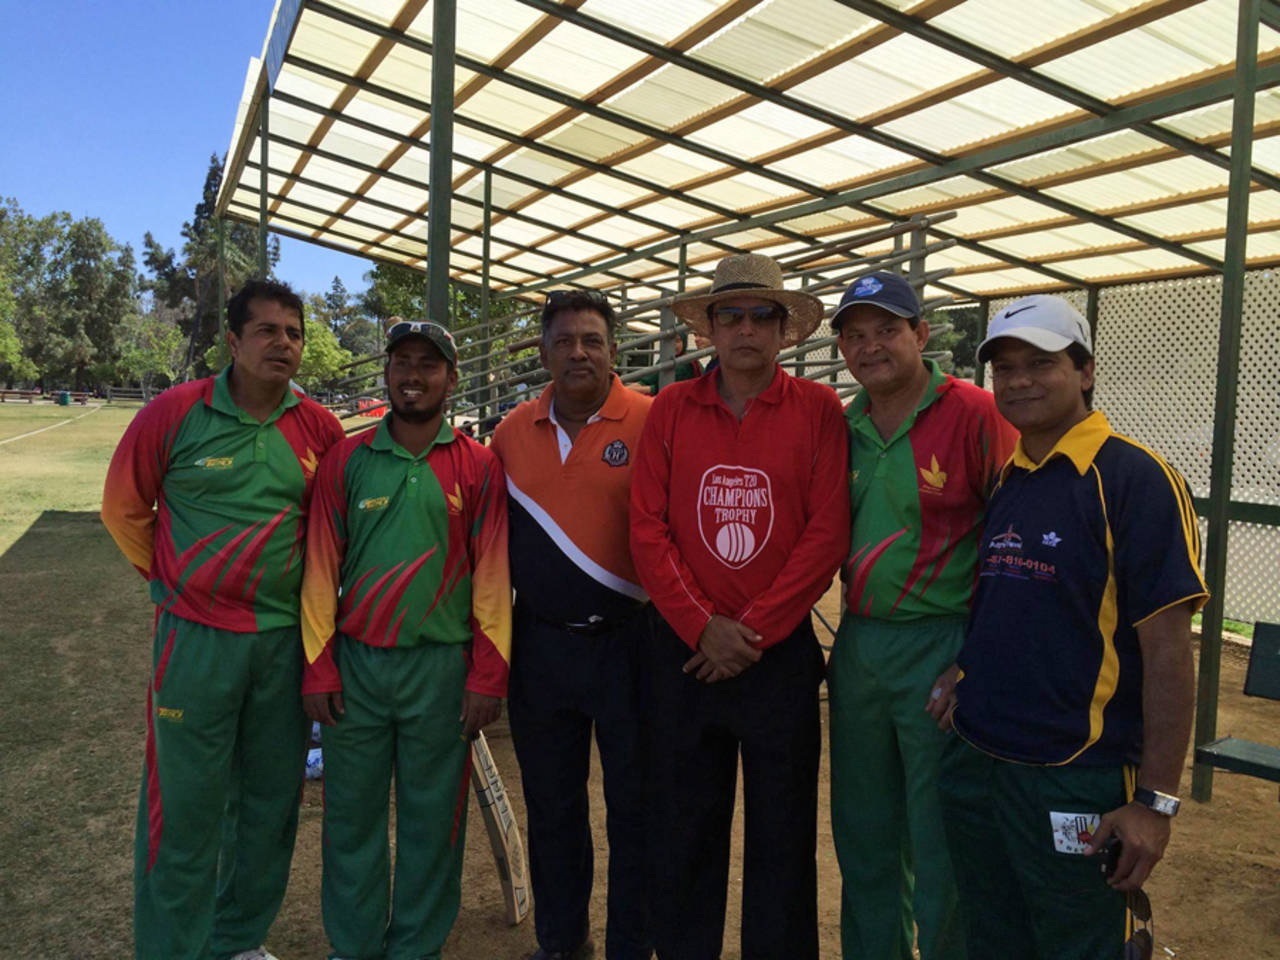 Mohammad Ashraful (second from left) and umpire Nadir Shah (third from right) at the LA T20 Championship